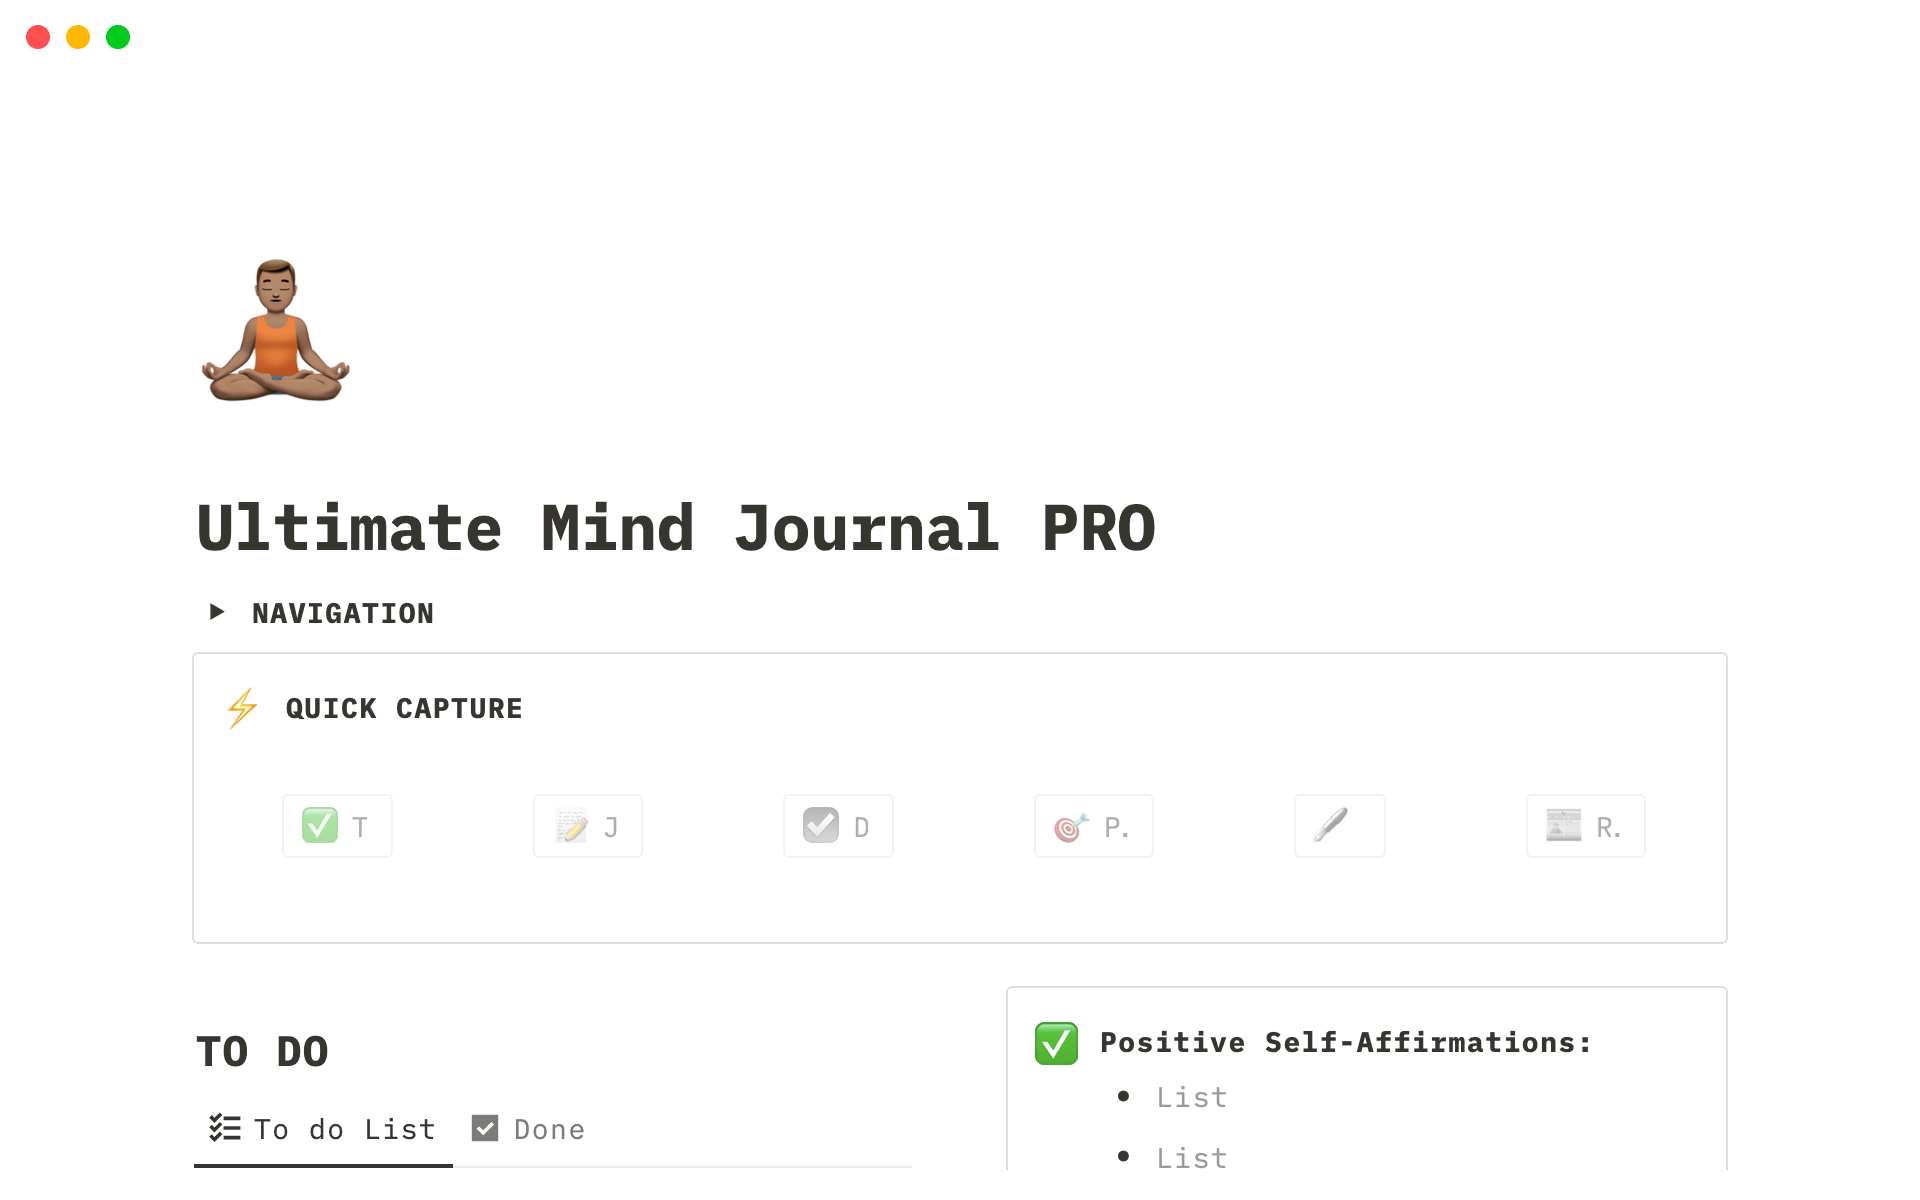 The Ultimate Mind Journal PRO allows you to easily track and monitor your daily mindfulness practices, gratitude journaling, and personal reflections, all in one convenient place